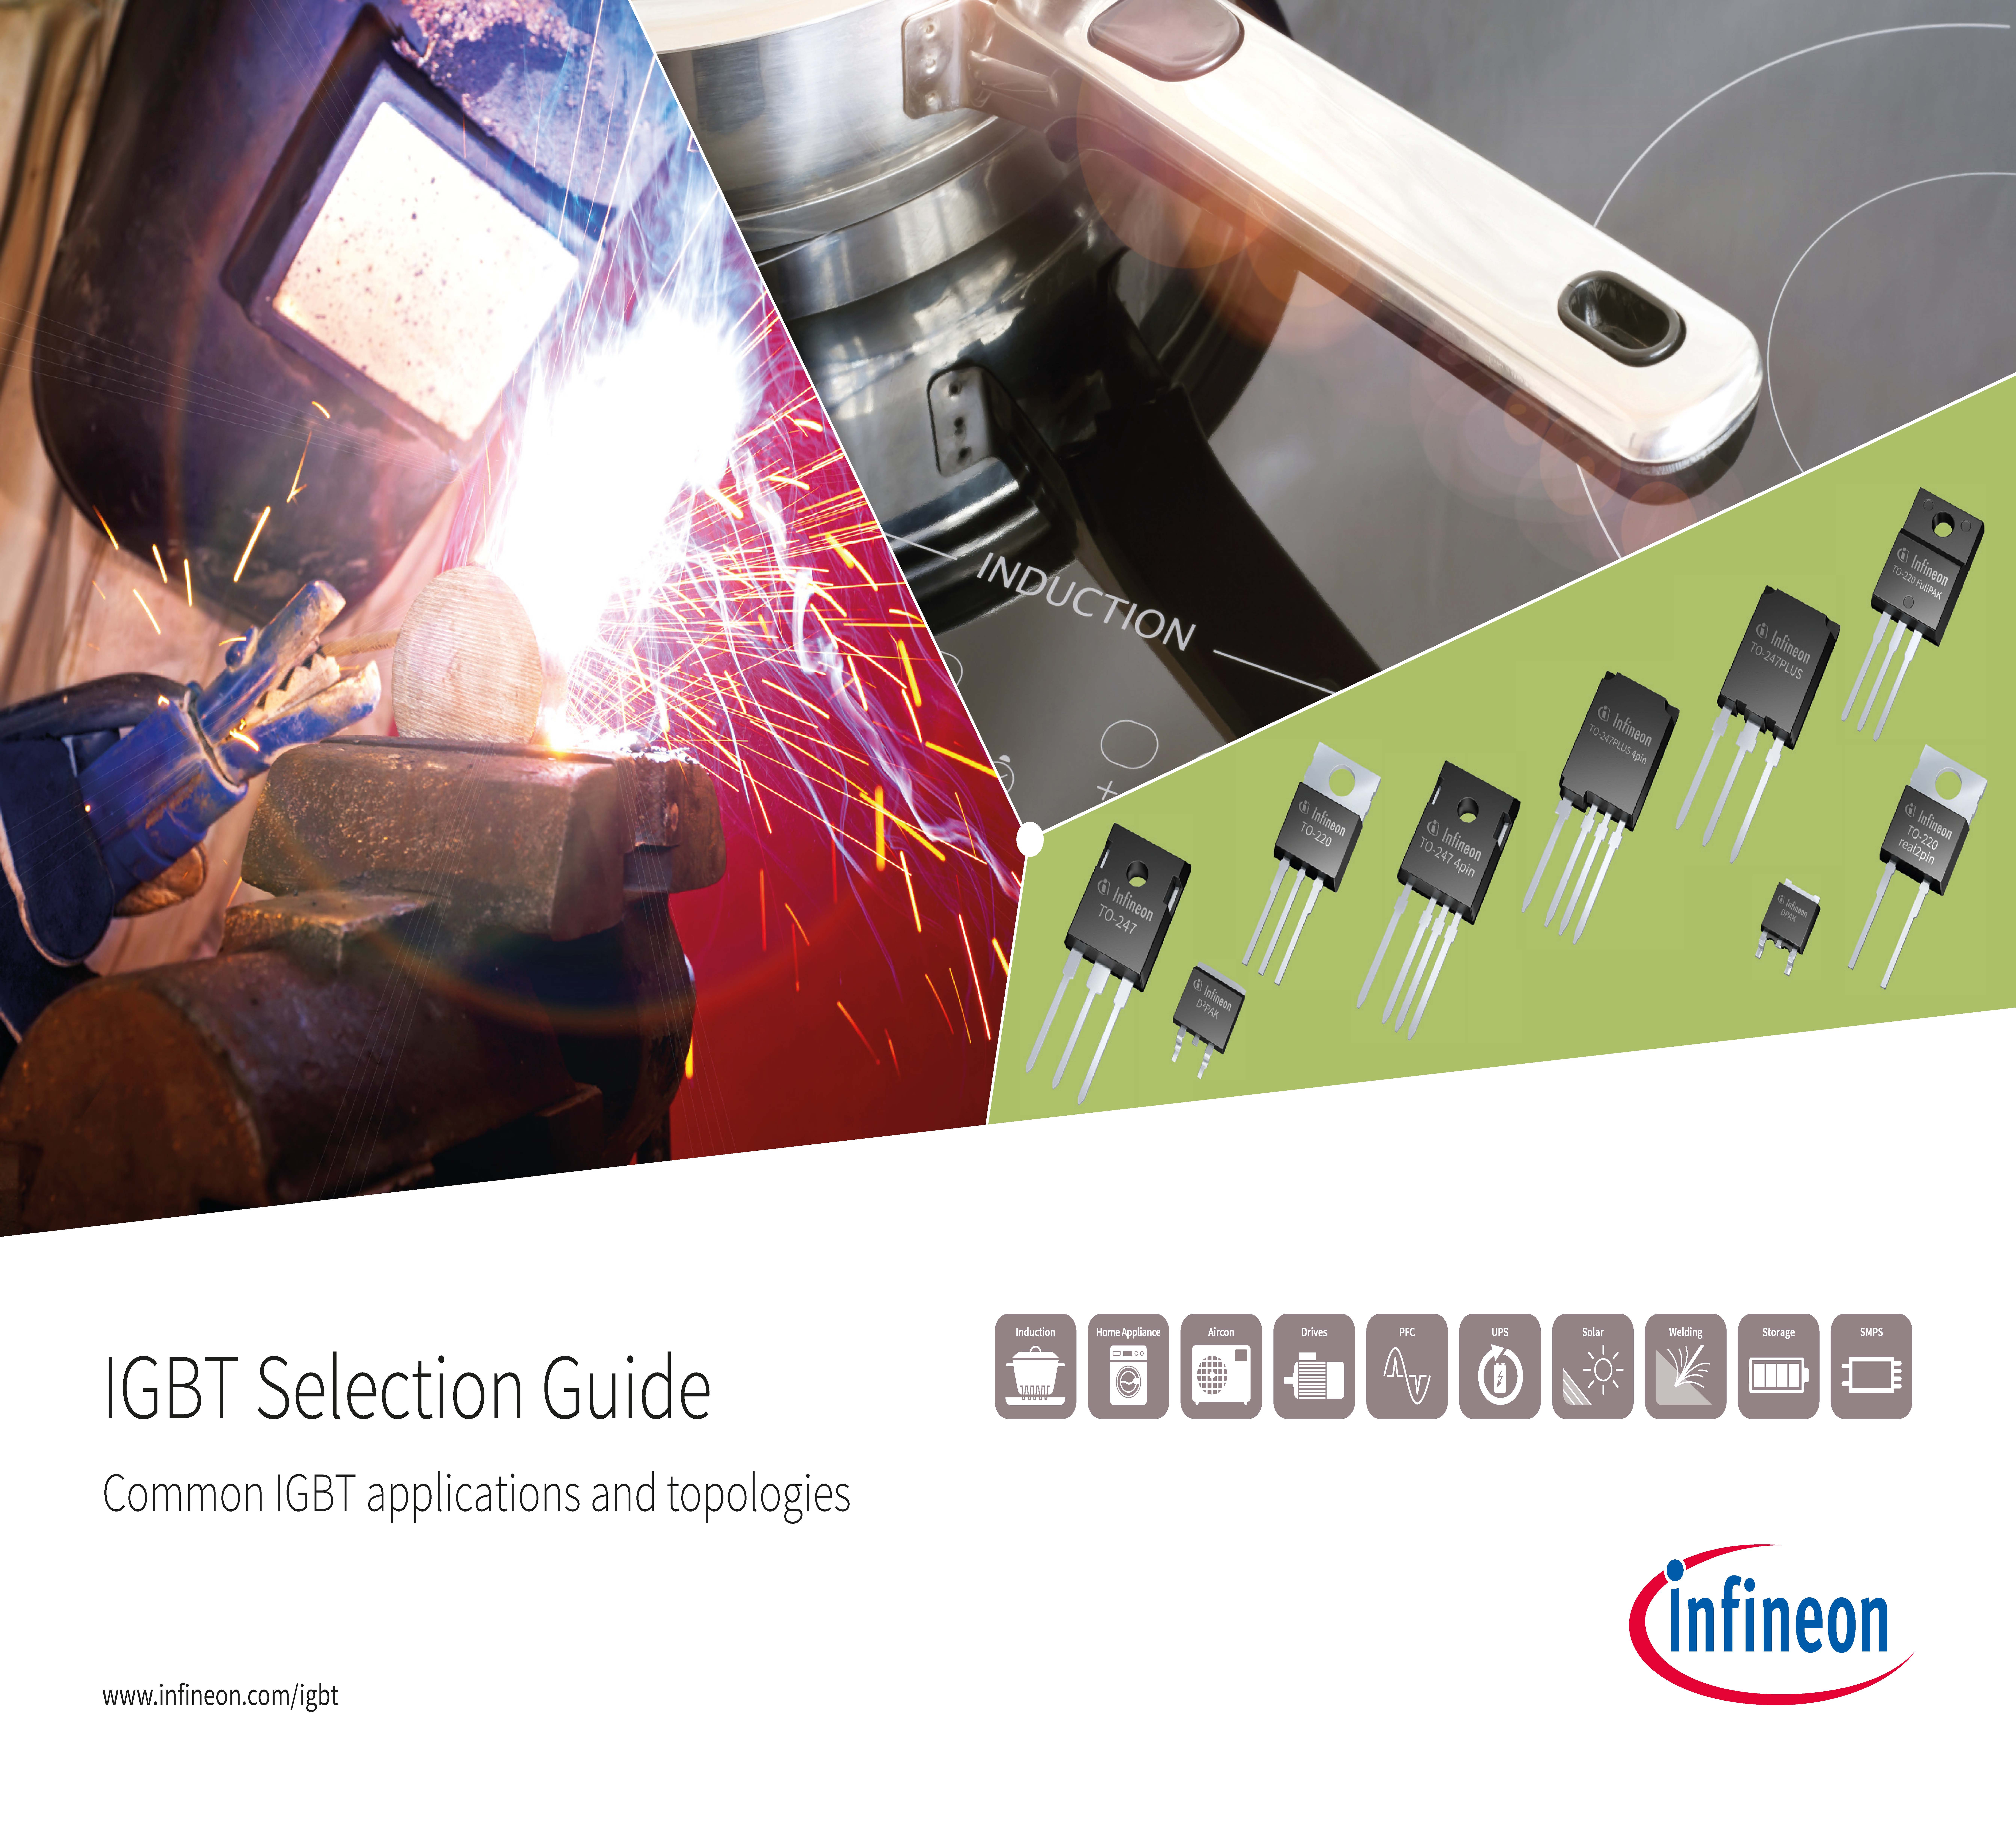 IGBT Selection Guide. Common IGBT applications and topologies